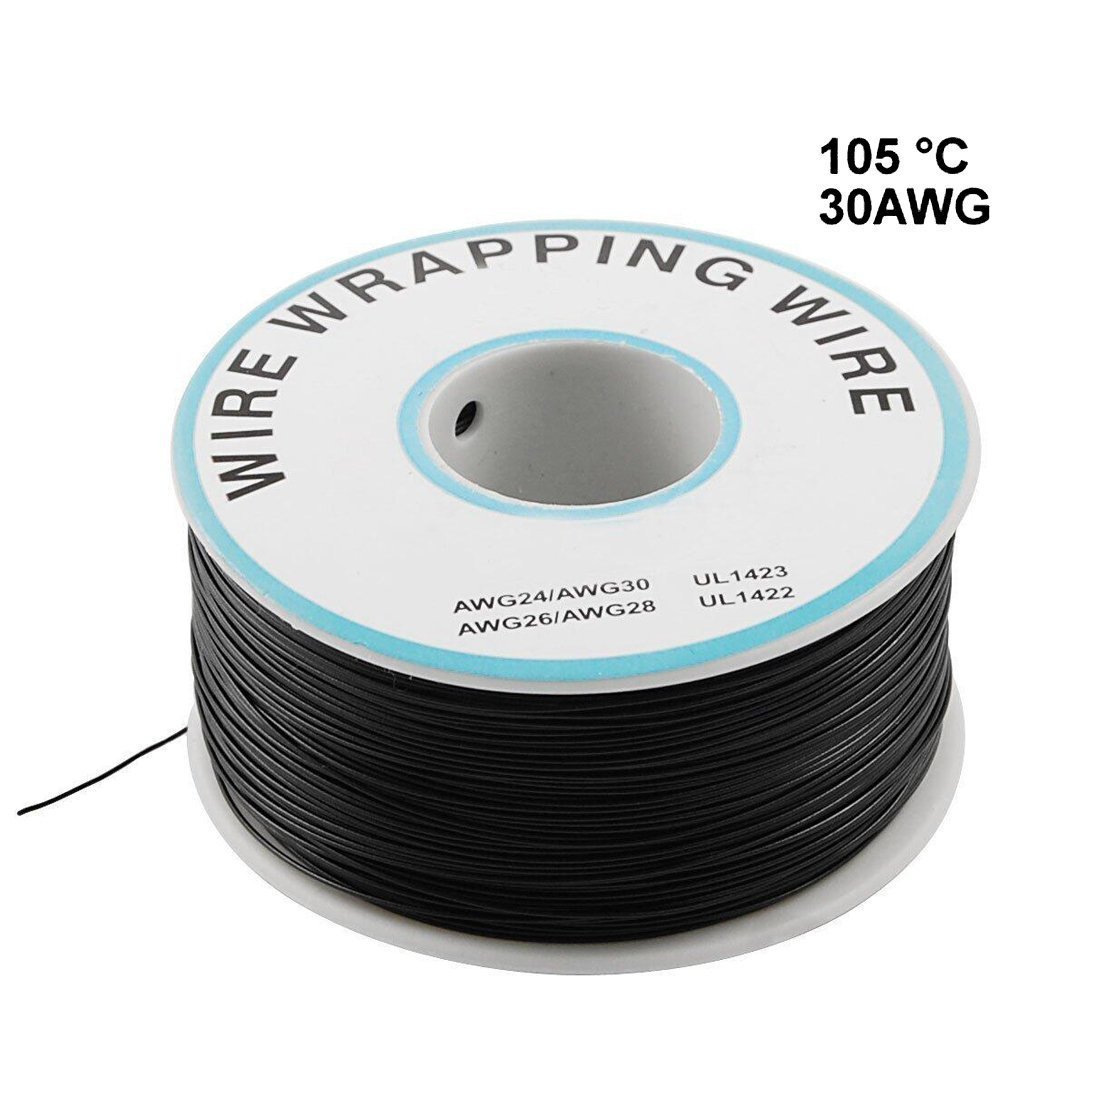 Generic 230M Pn B 30 1000 Insulated Pvc Coated 30Awg Wire Wrapping Wire Black 1